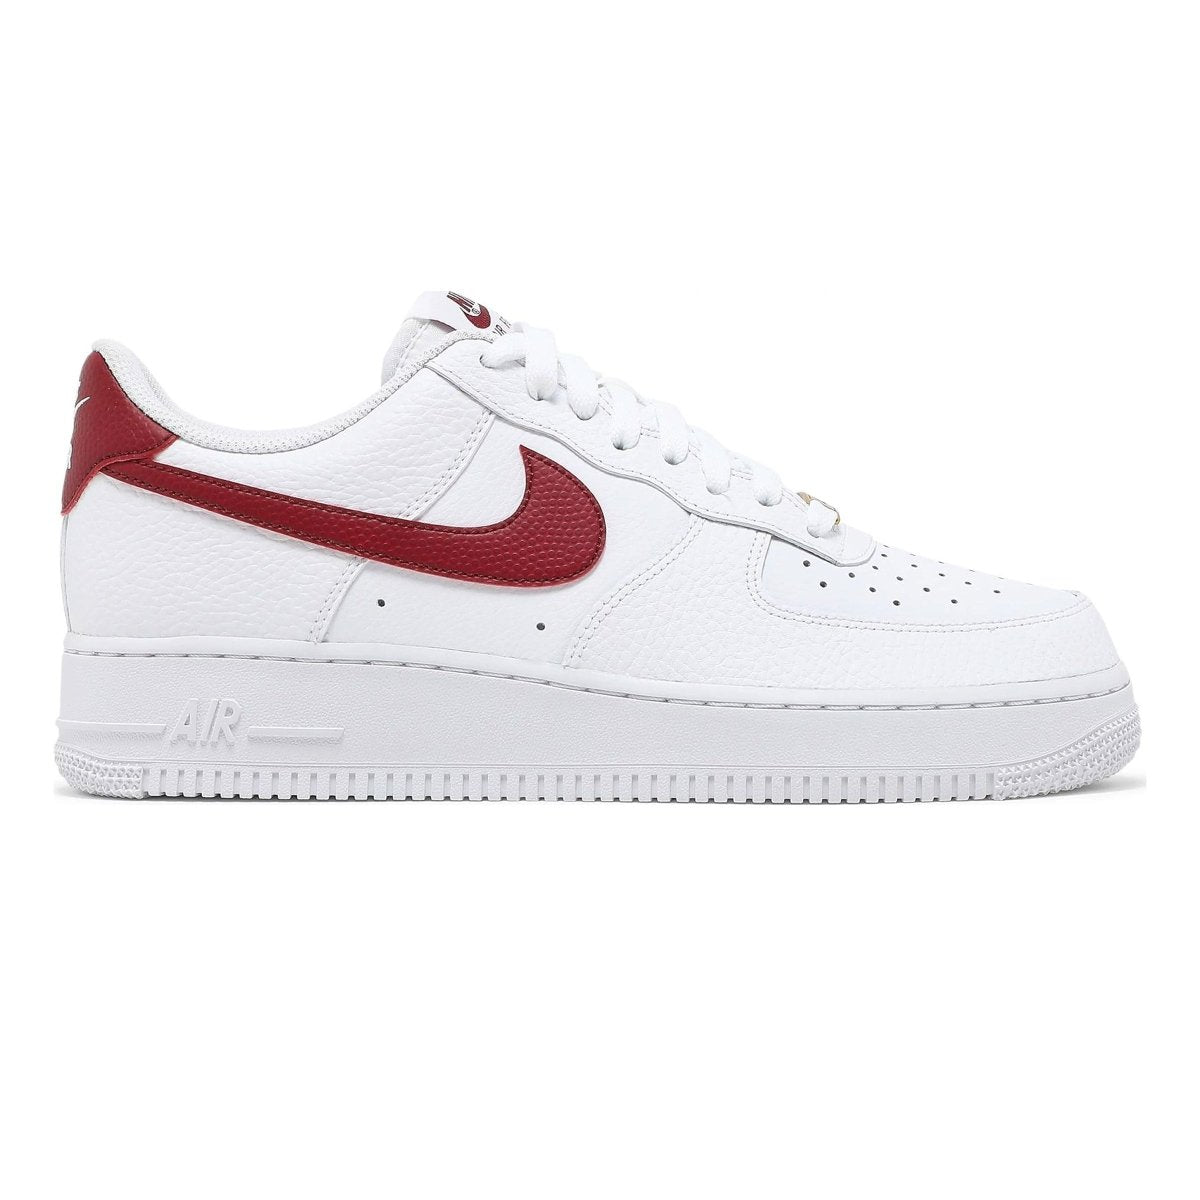 Nike Air Force 1 '07 Picante Red/White Men's Shoes, Size: 11.5